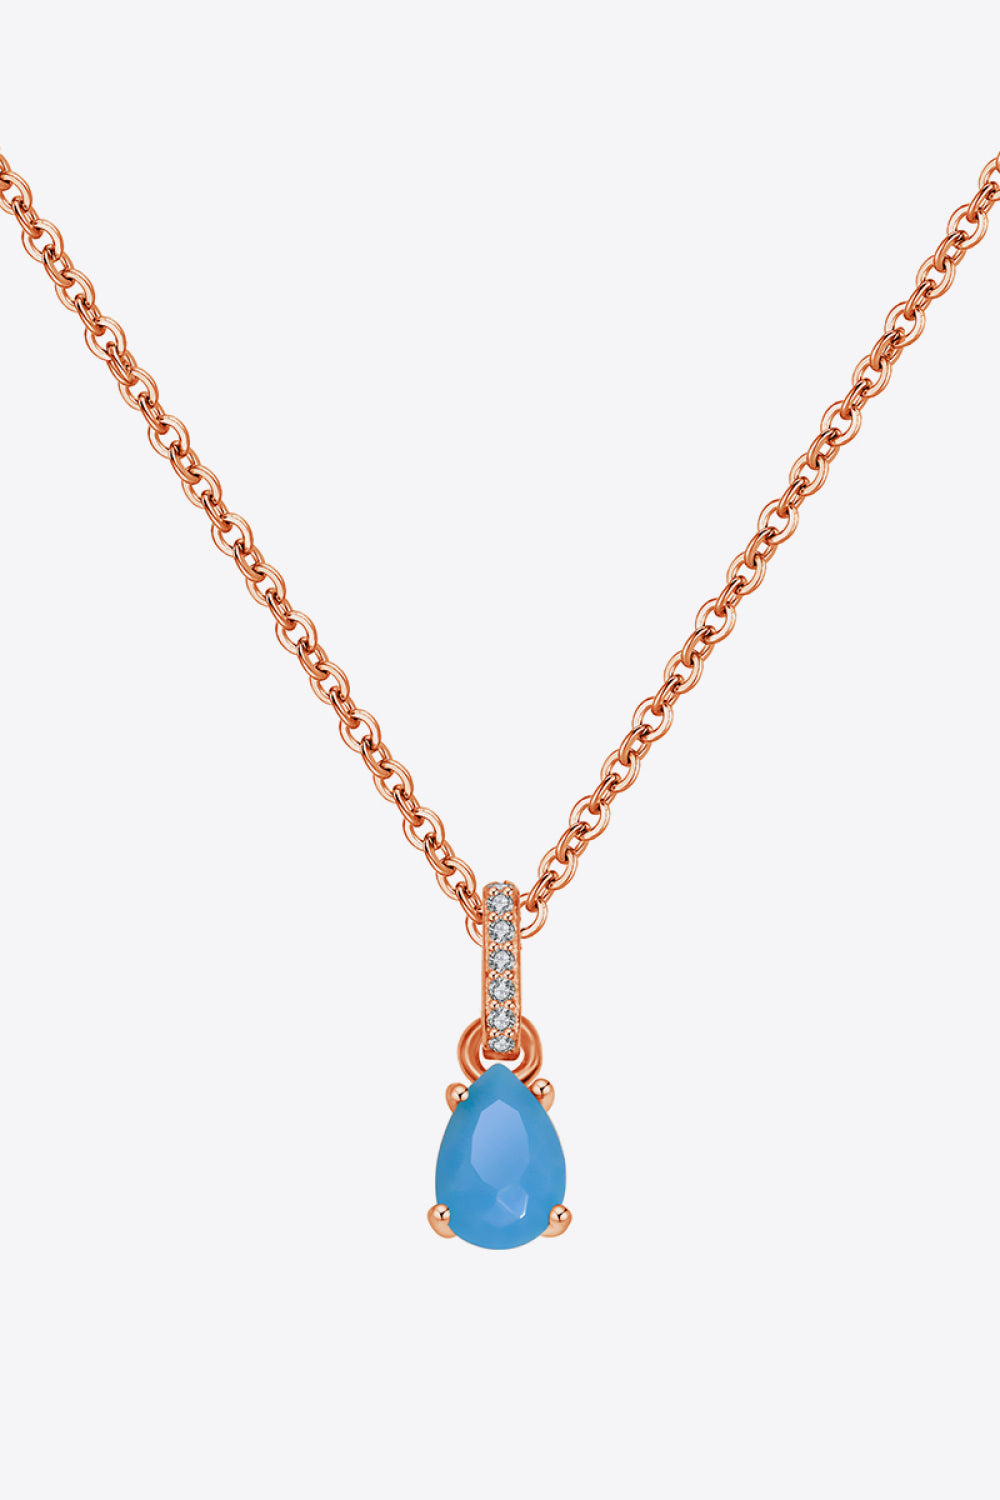 4 Prong Pendant Necklace' referring to a necklace with a pendant that is securely held in place by four prongs, creating a classic and elegant accessory.